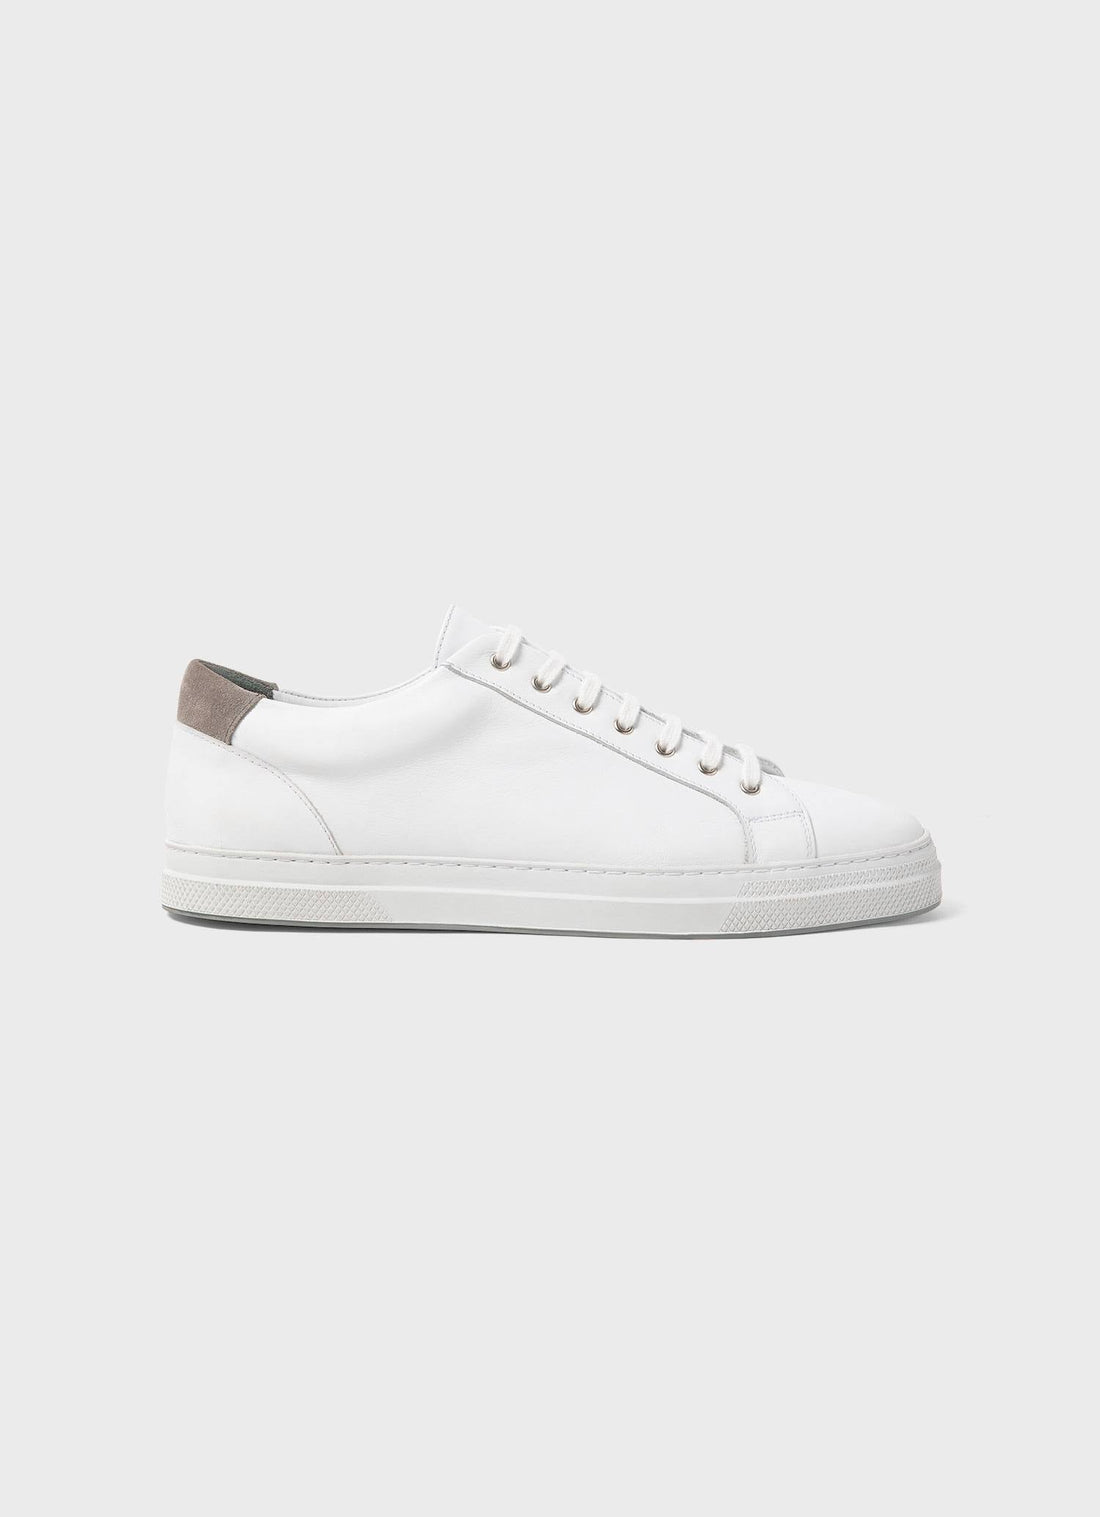 Women's Leather Tennis Shoes in White